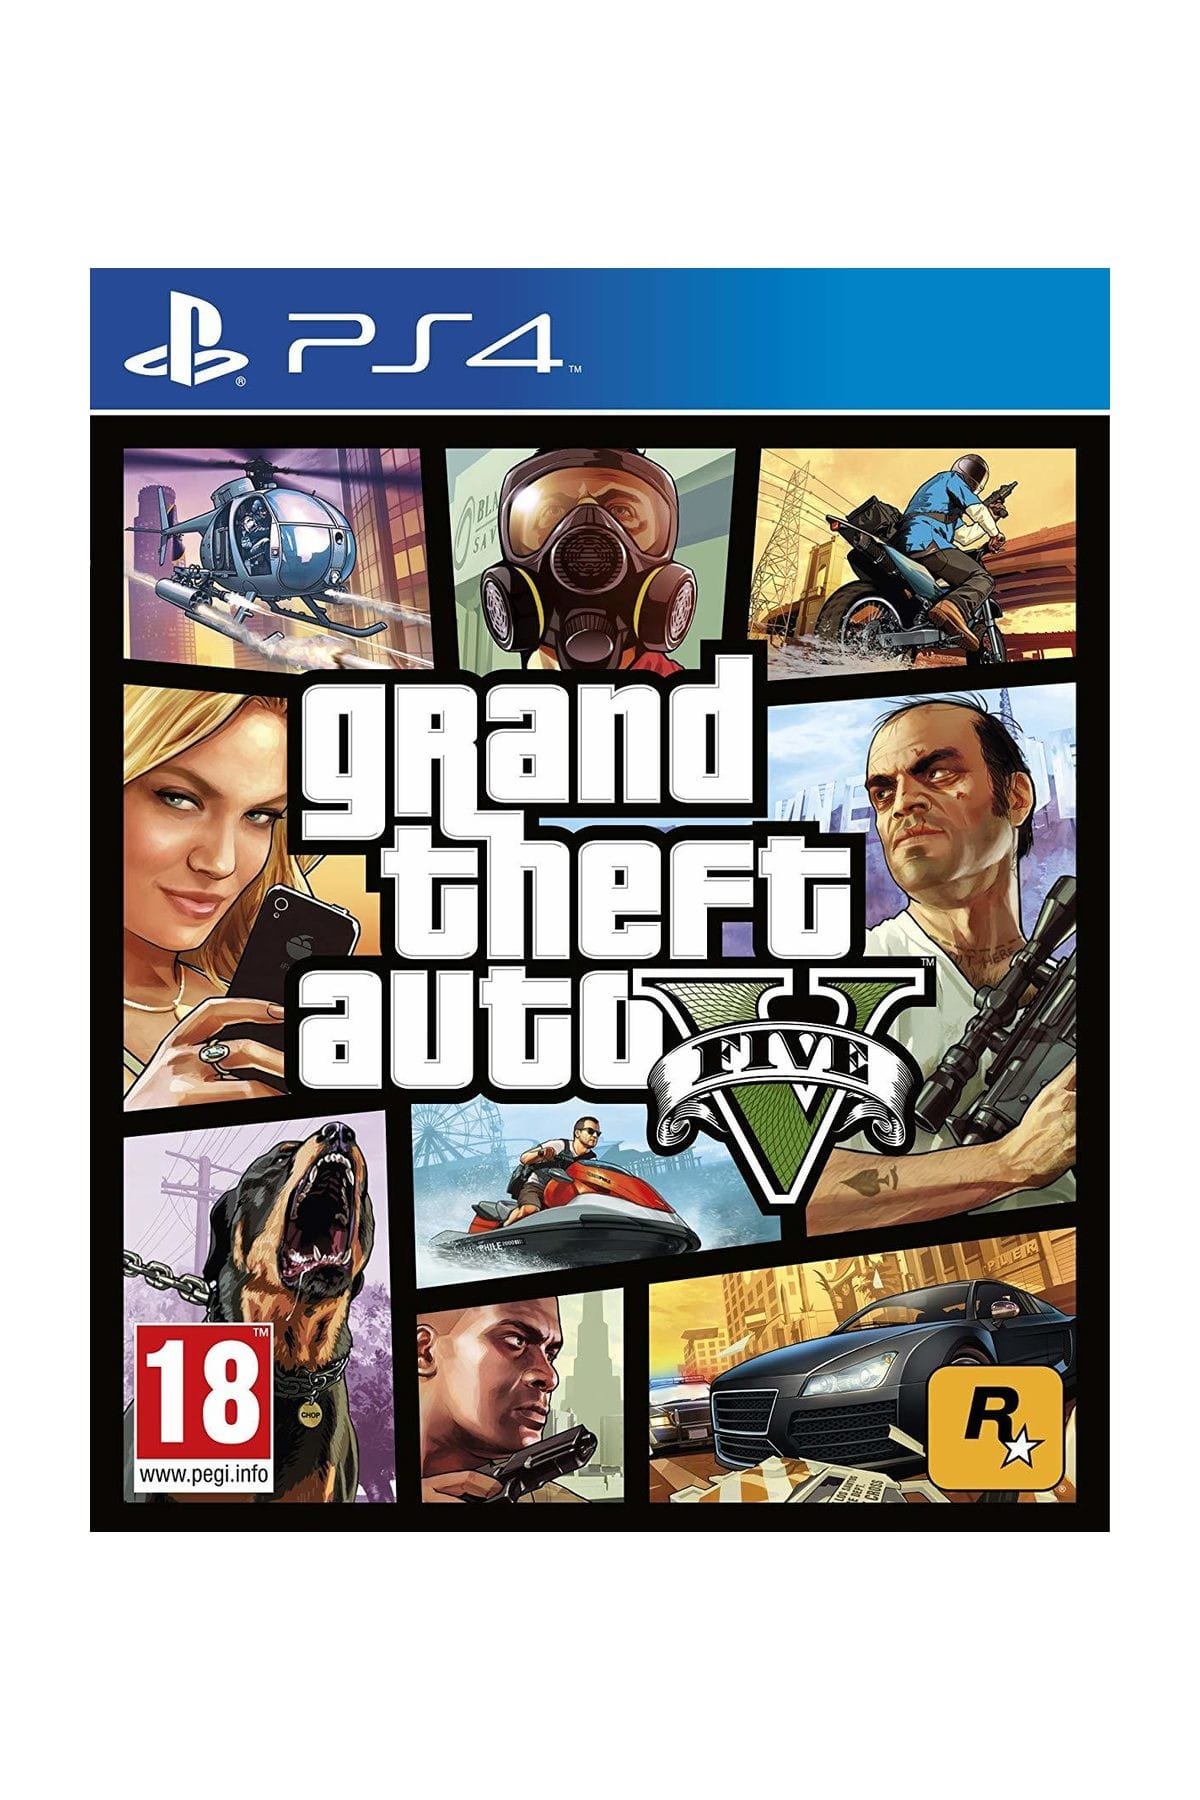 What price will gta 5 be фото 111